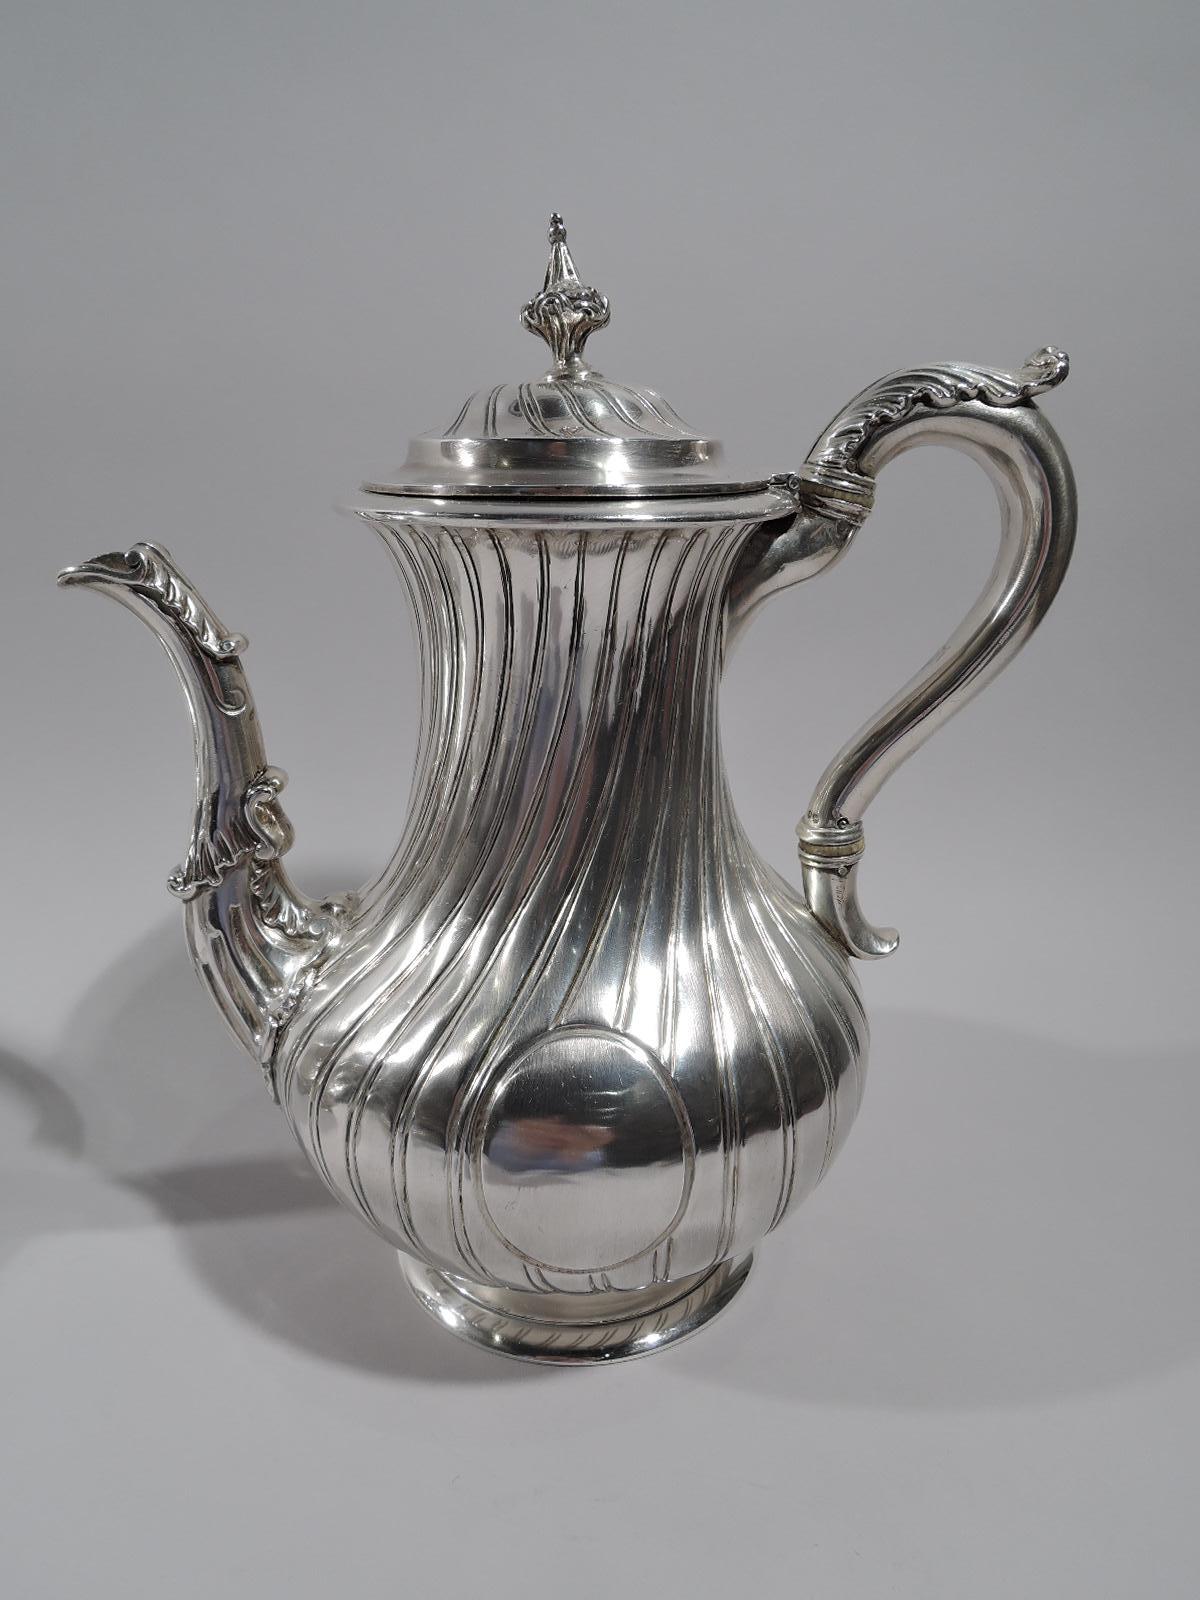 William IV sterling silver coffee and tea set. Made by Paul Storr in London in 1835. This set comprises coffeepot, teapot, creamer, and sugar.

Late Regency Classicism with dynamic twisted fluting. Coffeepot and creamer baluster, and teapot and